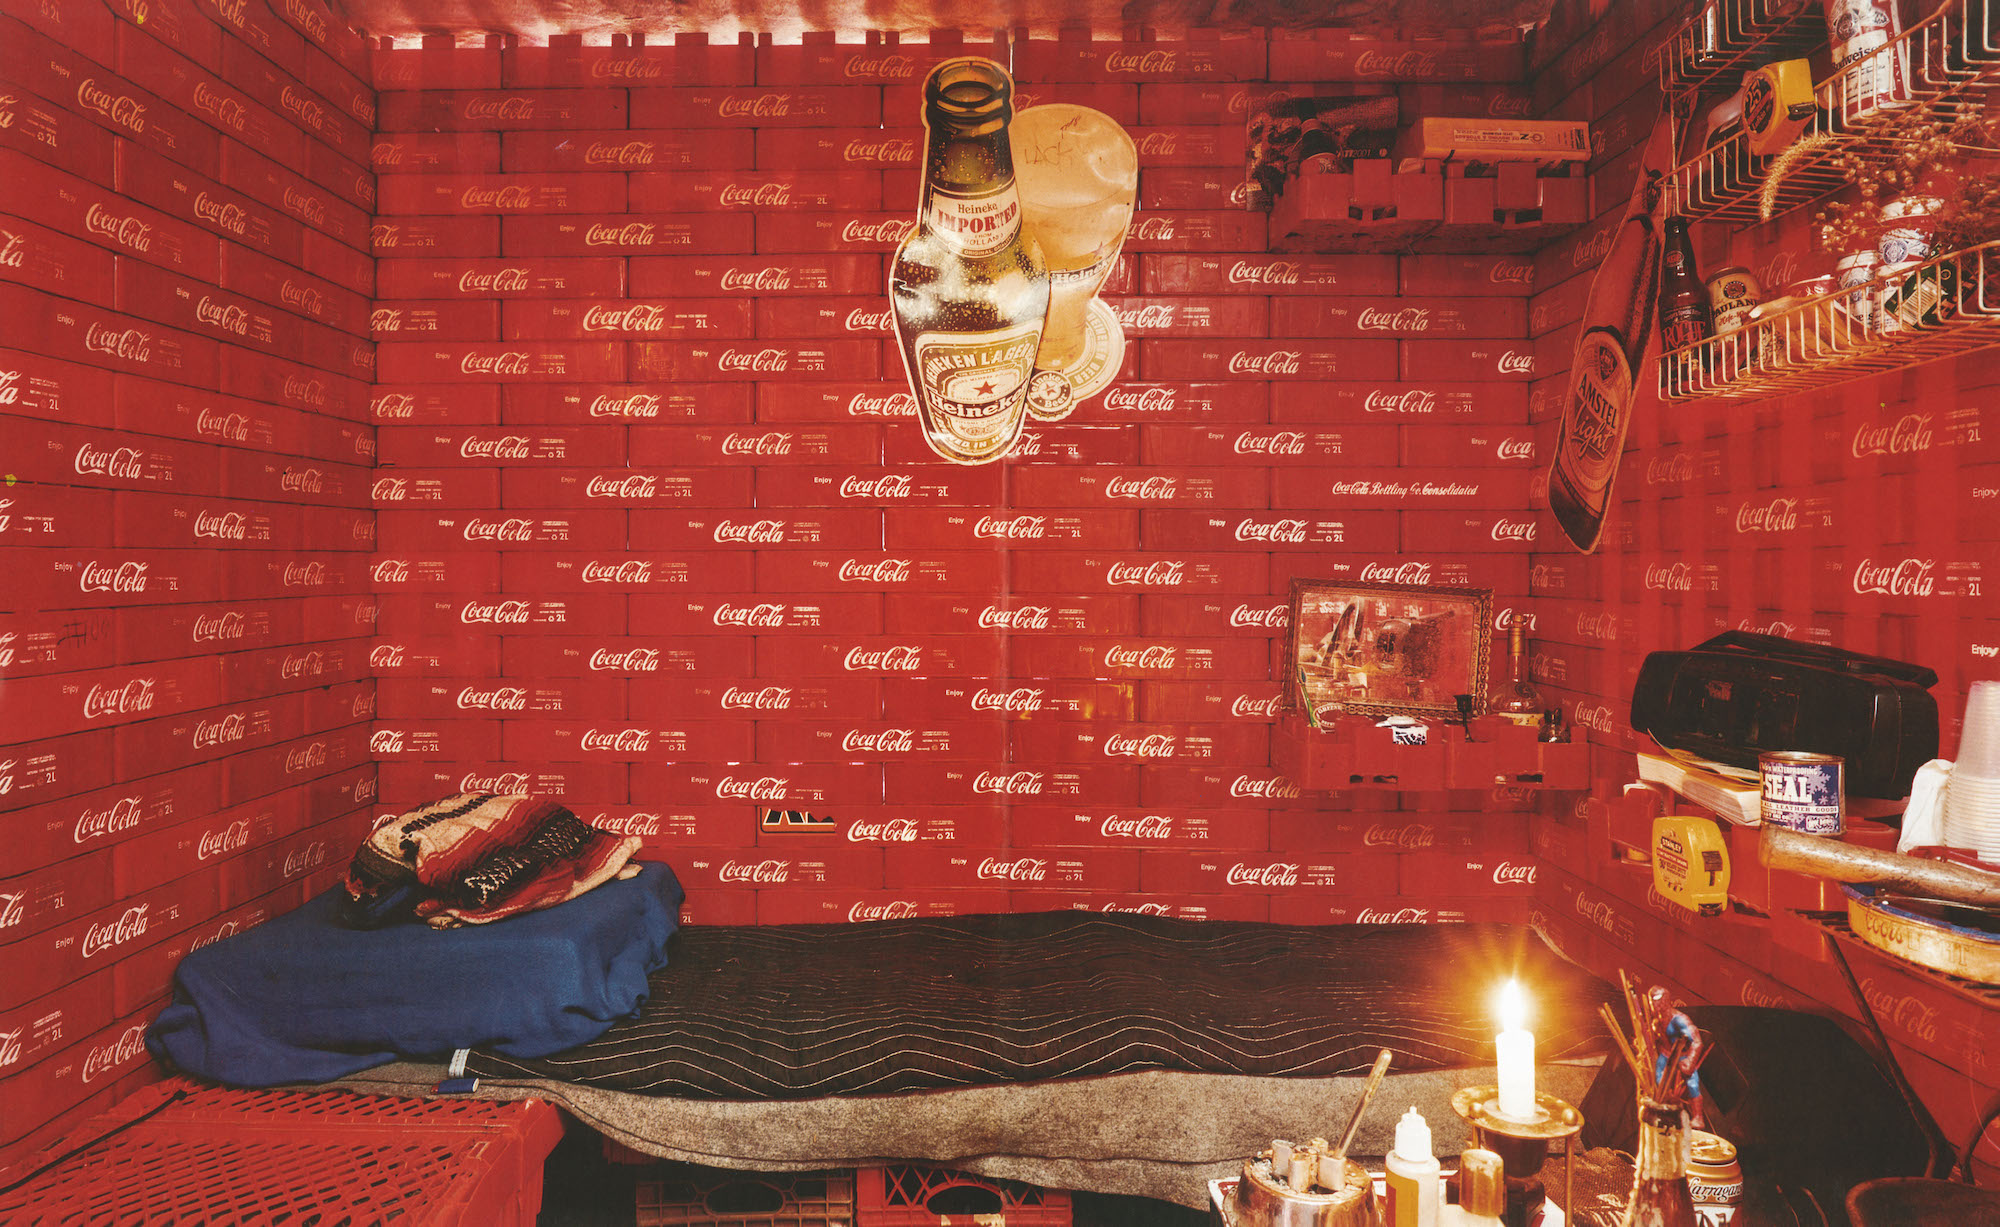 Nest 19, Winter 2002-03. The Workhouse. (Peter’s Coca-Cola house, assembled from plastic Coke crates, Harlem, New York, NY). Photograph: Ejlat Feuer.